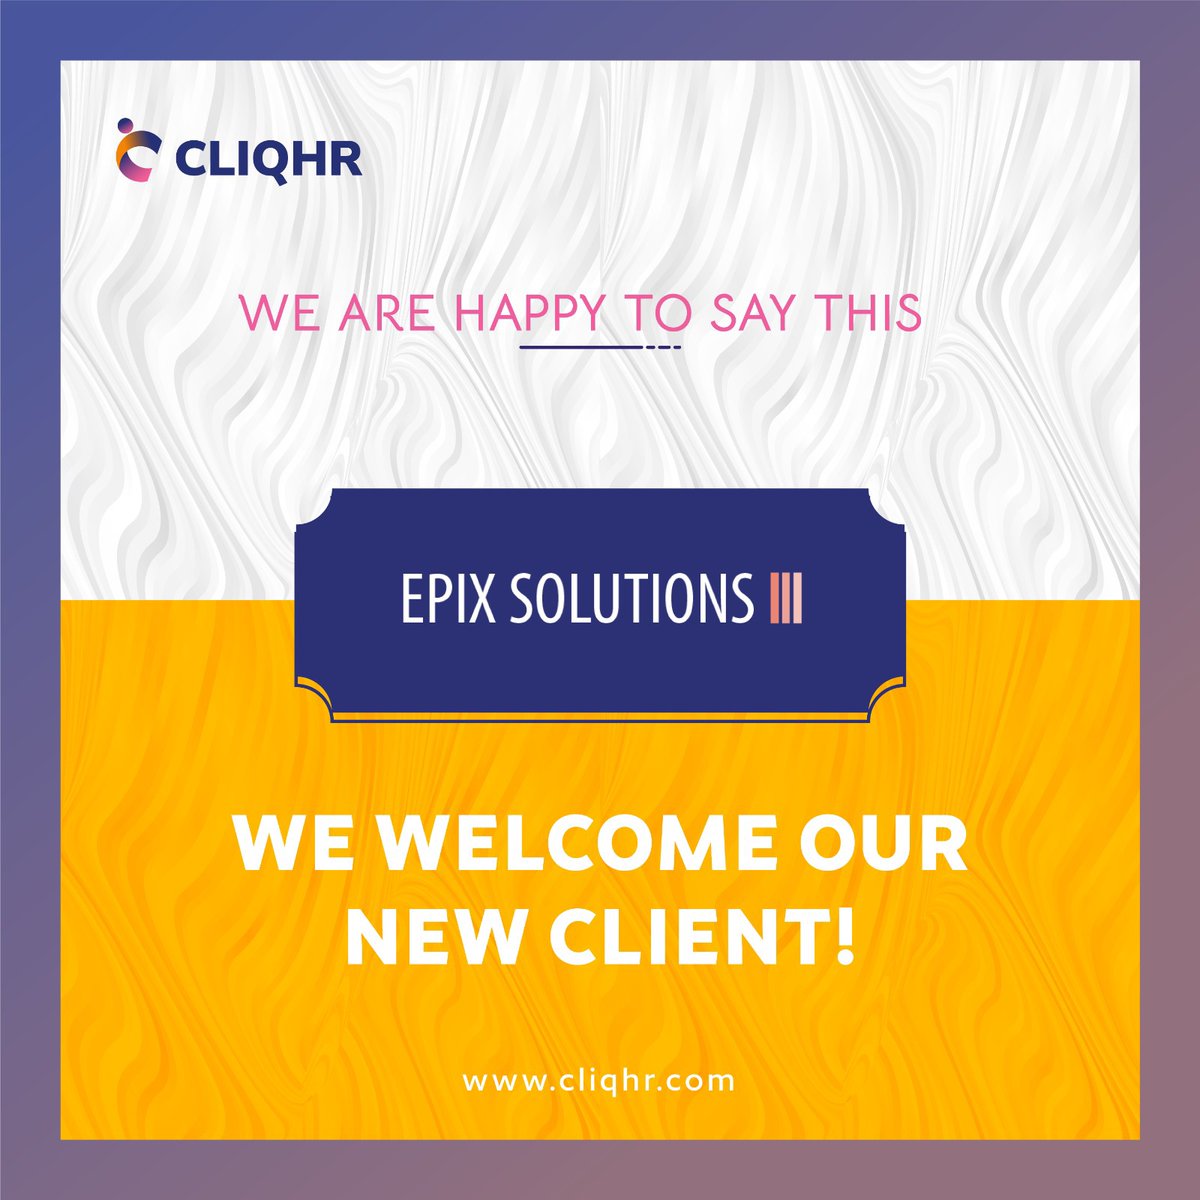 We welcome our new client Epix Solutions.

Thank you for choosing us as your recruitment partner, looking forward to a long and successful collaboration.

#recruitmentpartner #hrconsultant #recruitmentagency #recruitmentservices #recruitmentsolutions #recruitmentsolutions #cliqhr